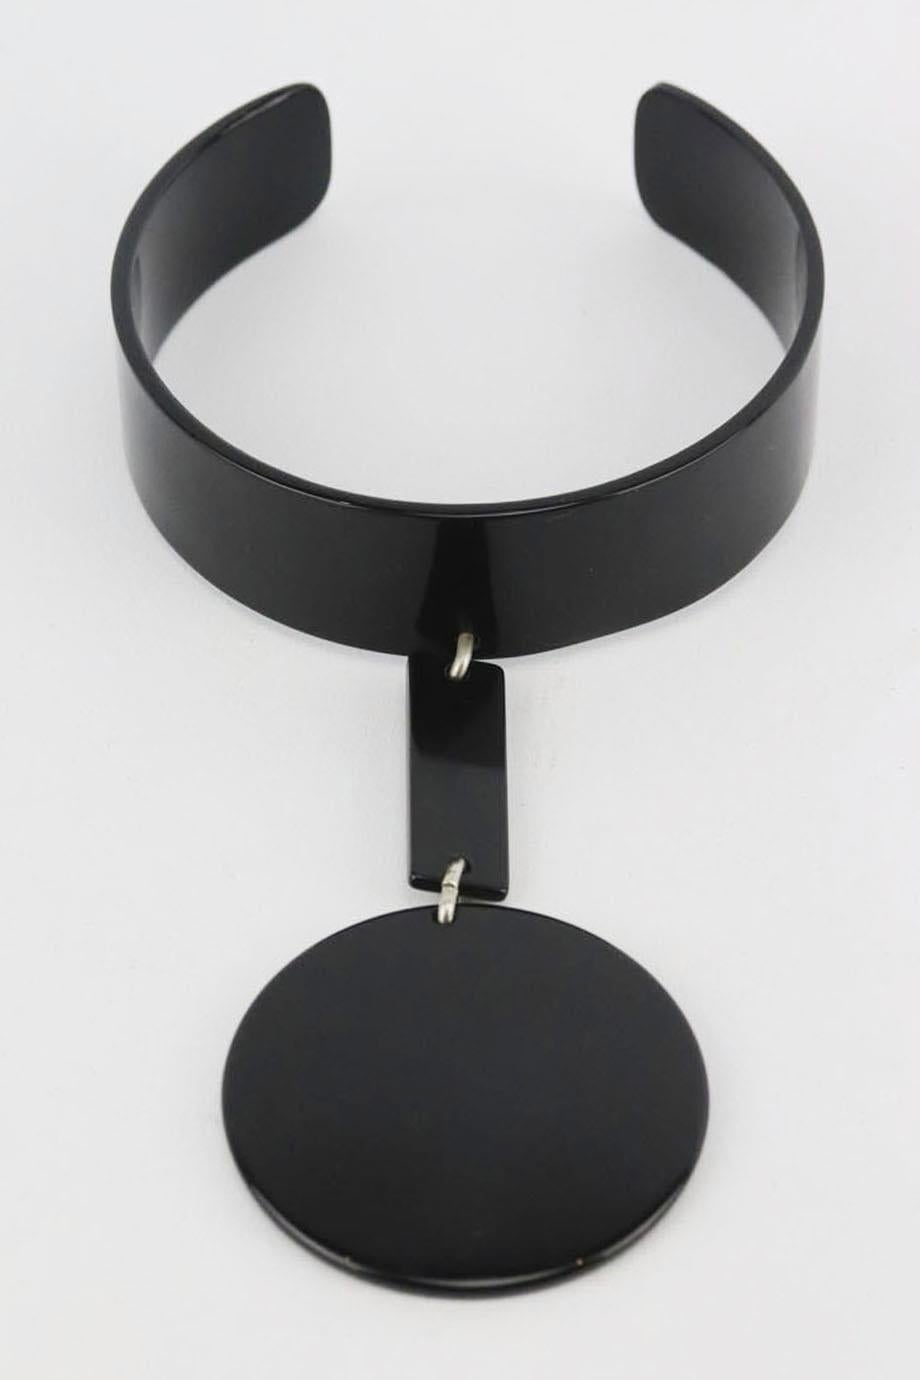 Missoni vintage perspex choker. Black. Slips on. Does not come with dustbag or box. Circumference: 13 in. Width: 1 in. Pendant Drop: 4 in Very good condition - Some signs of wear; see pictures.
